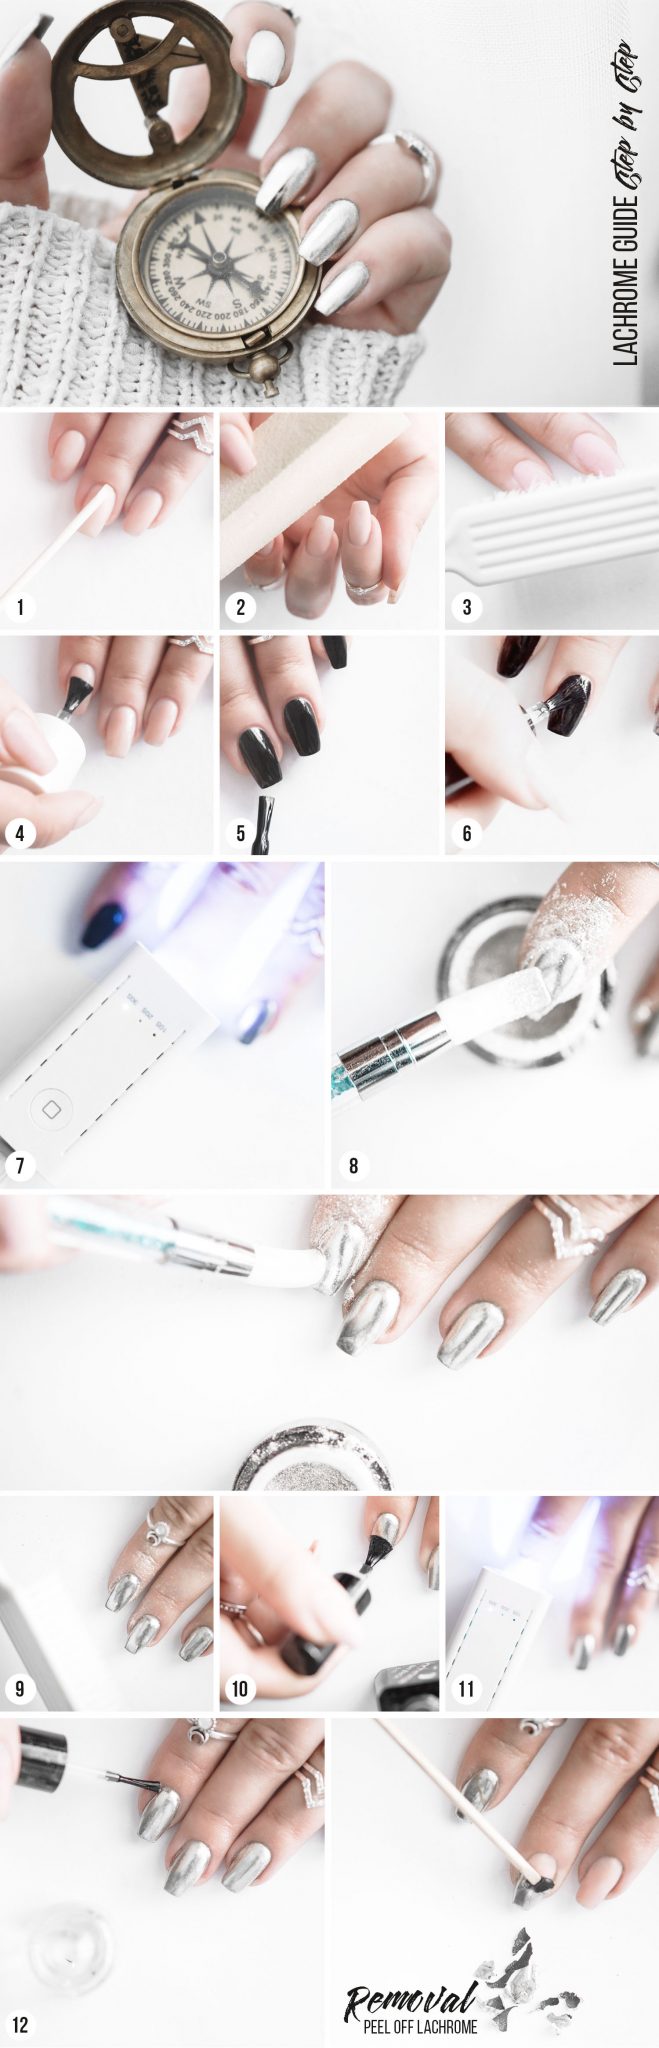 Lachrome - Chrome Nails Tutorial with L.Y.X Cosmetics